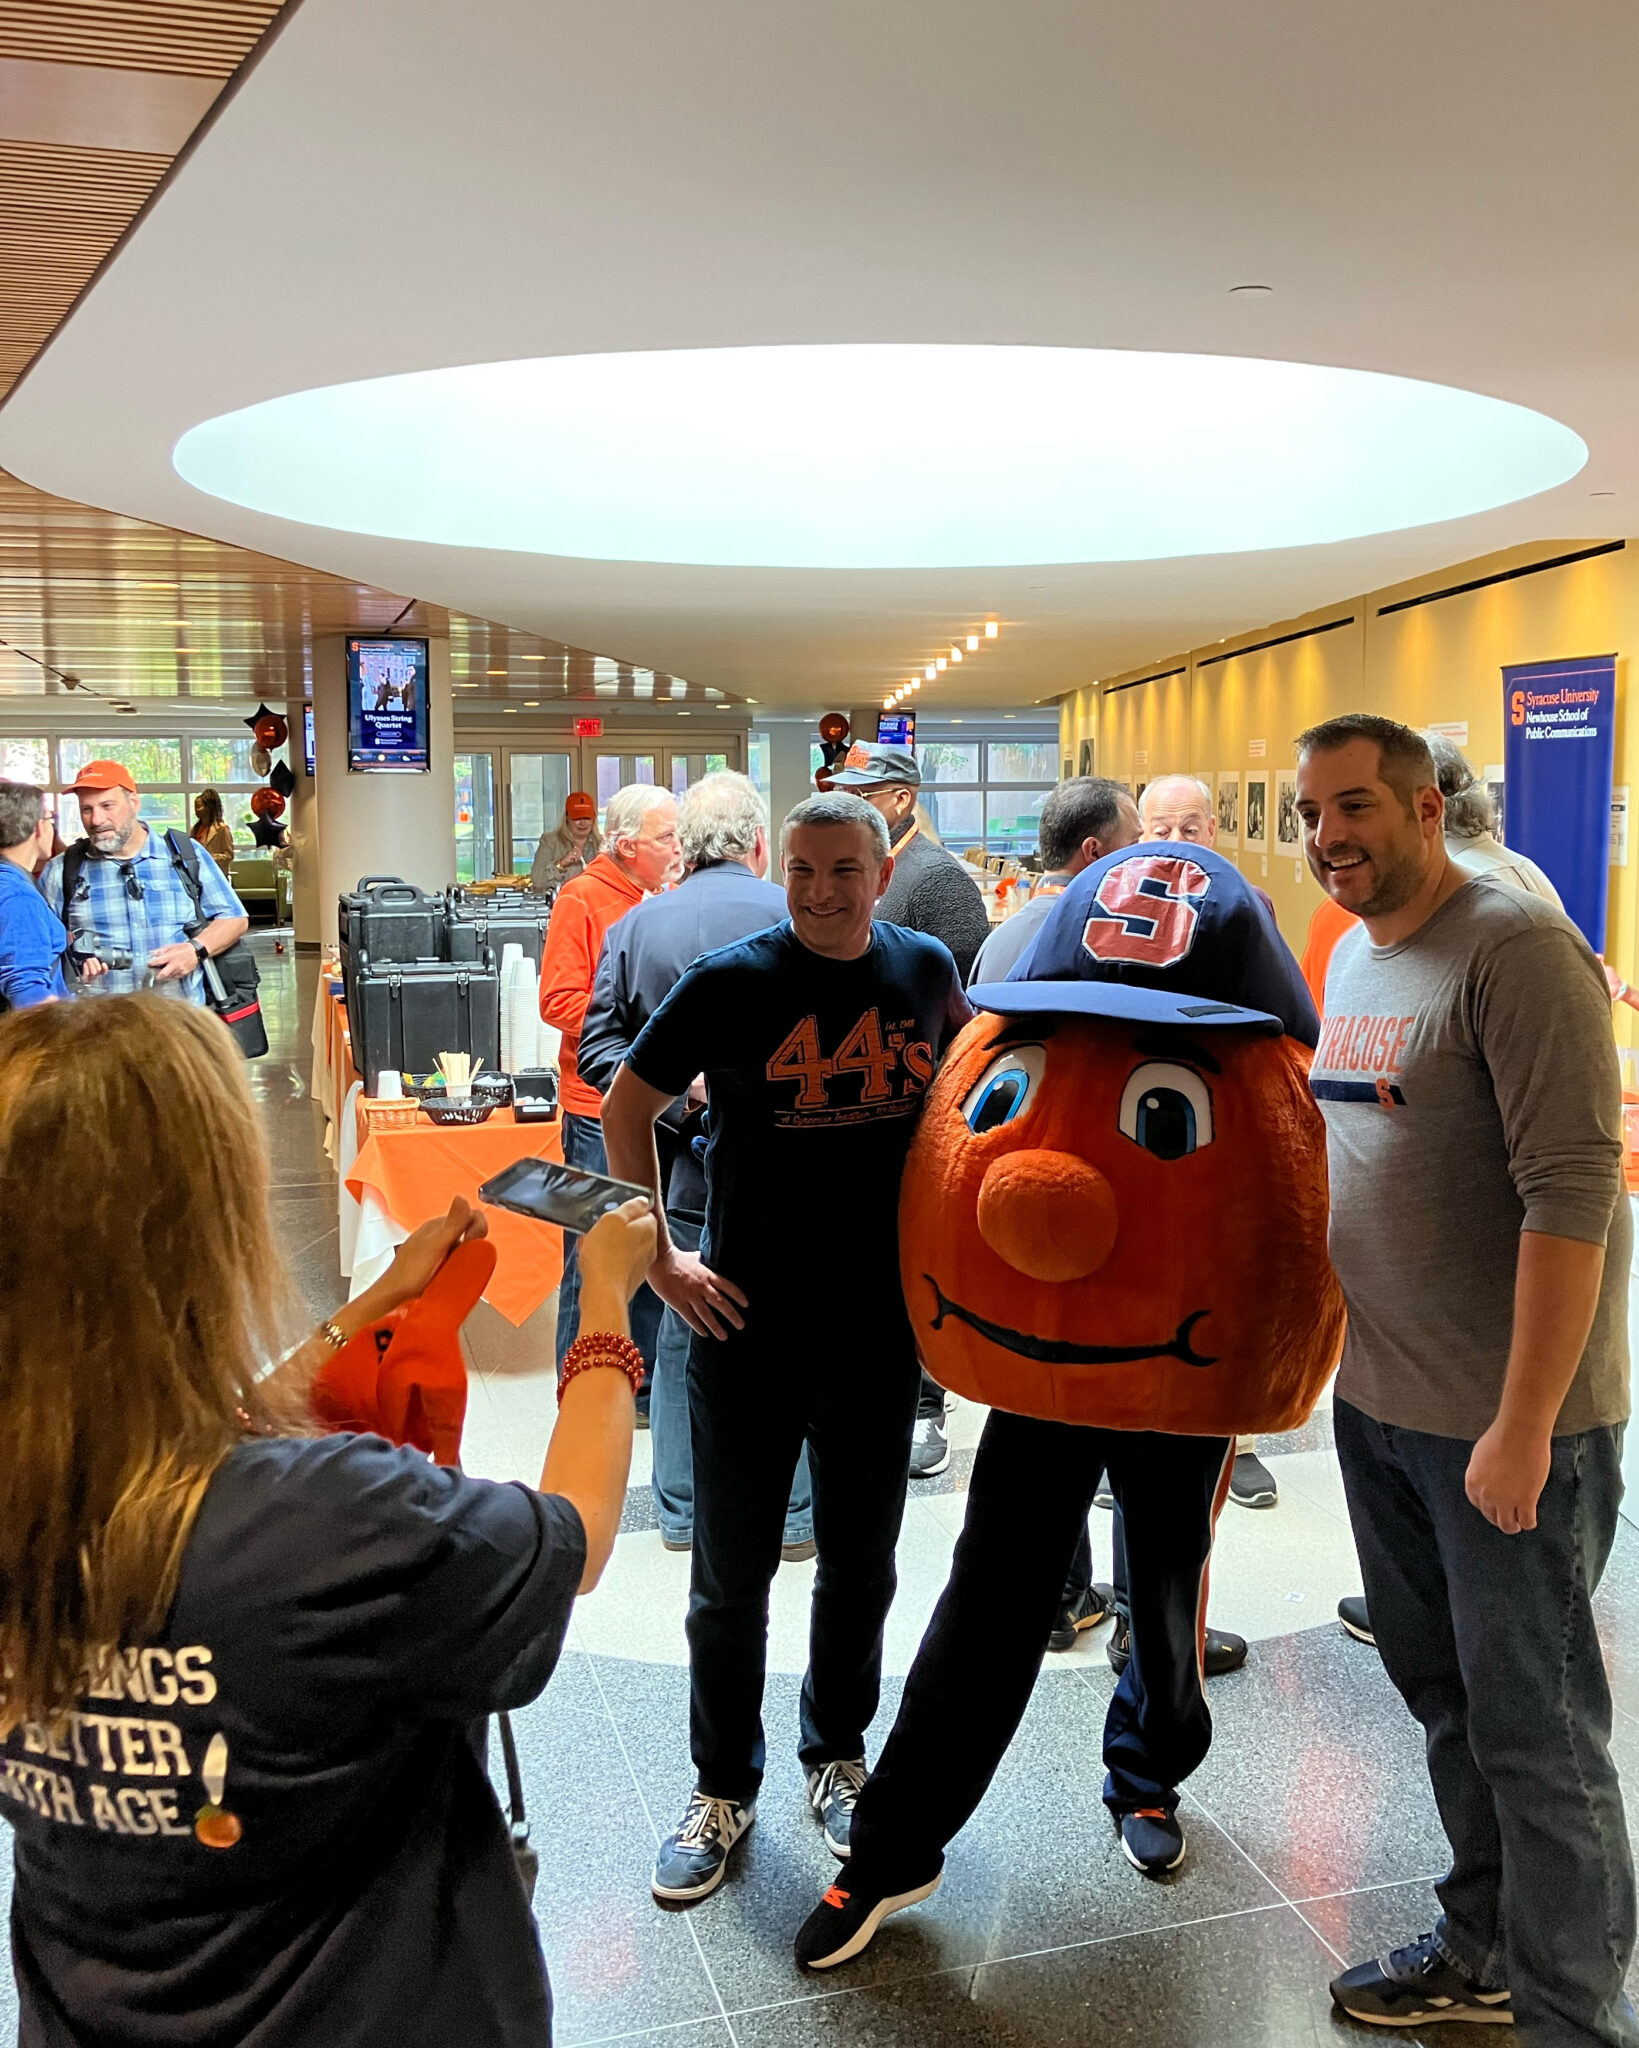 a woman takes a photo of two men posing with a mascot